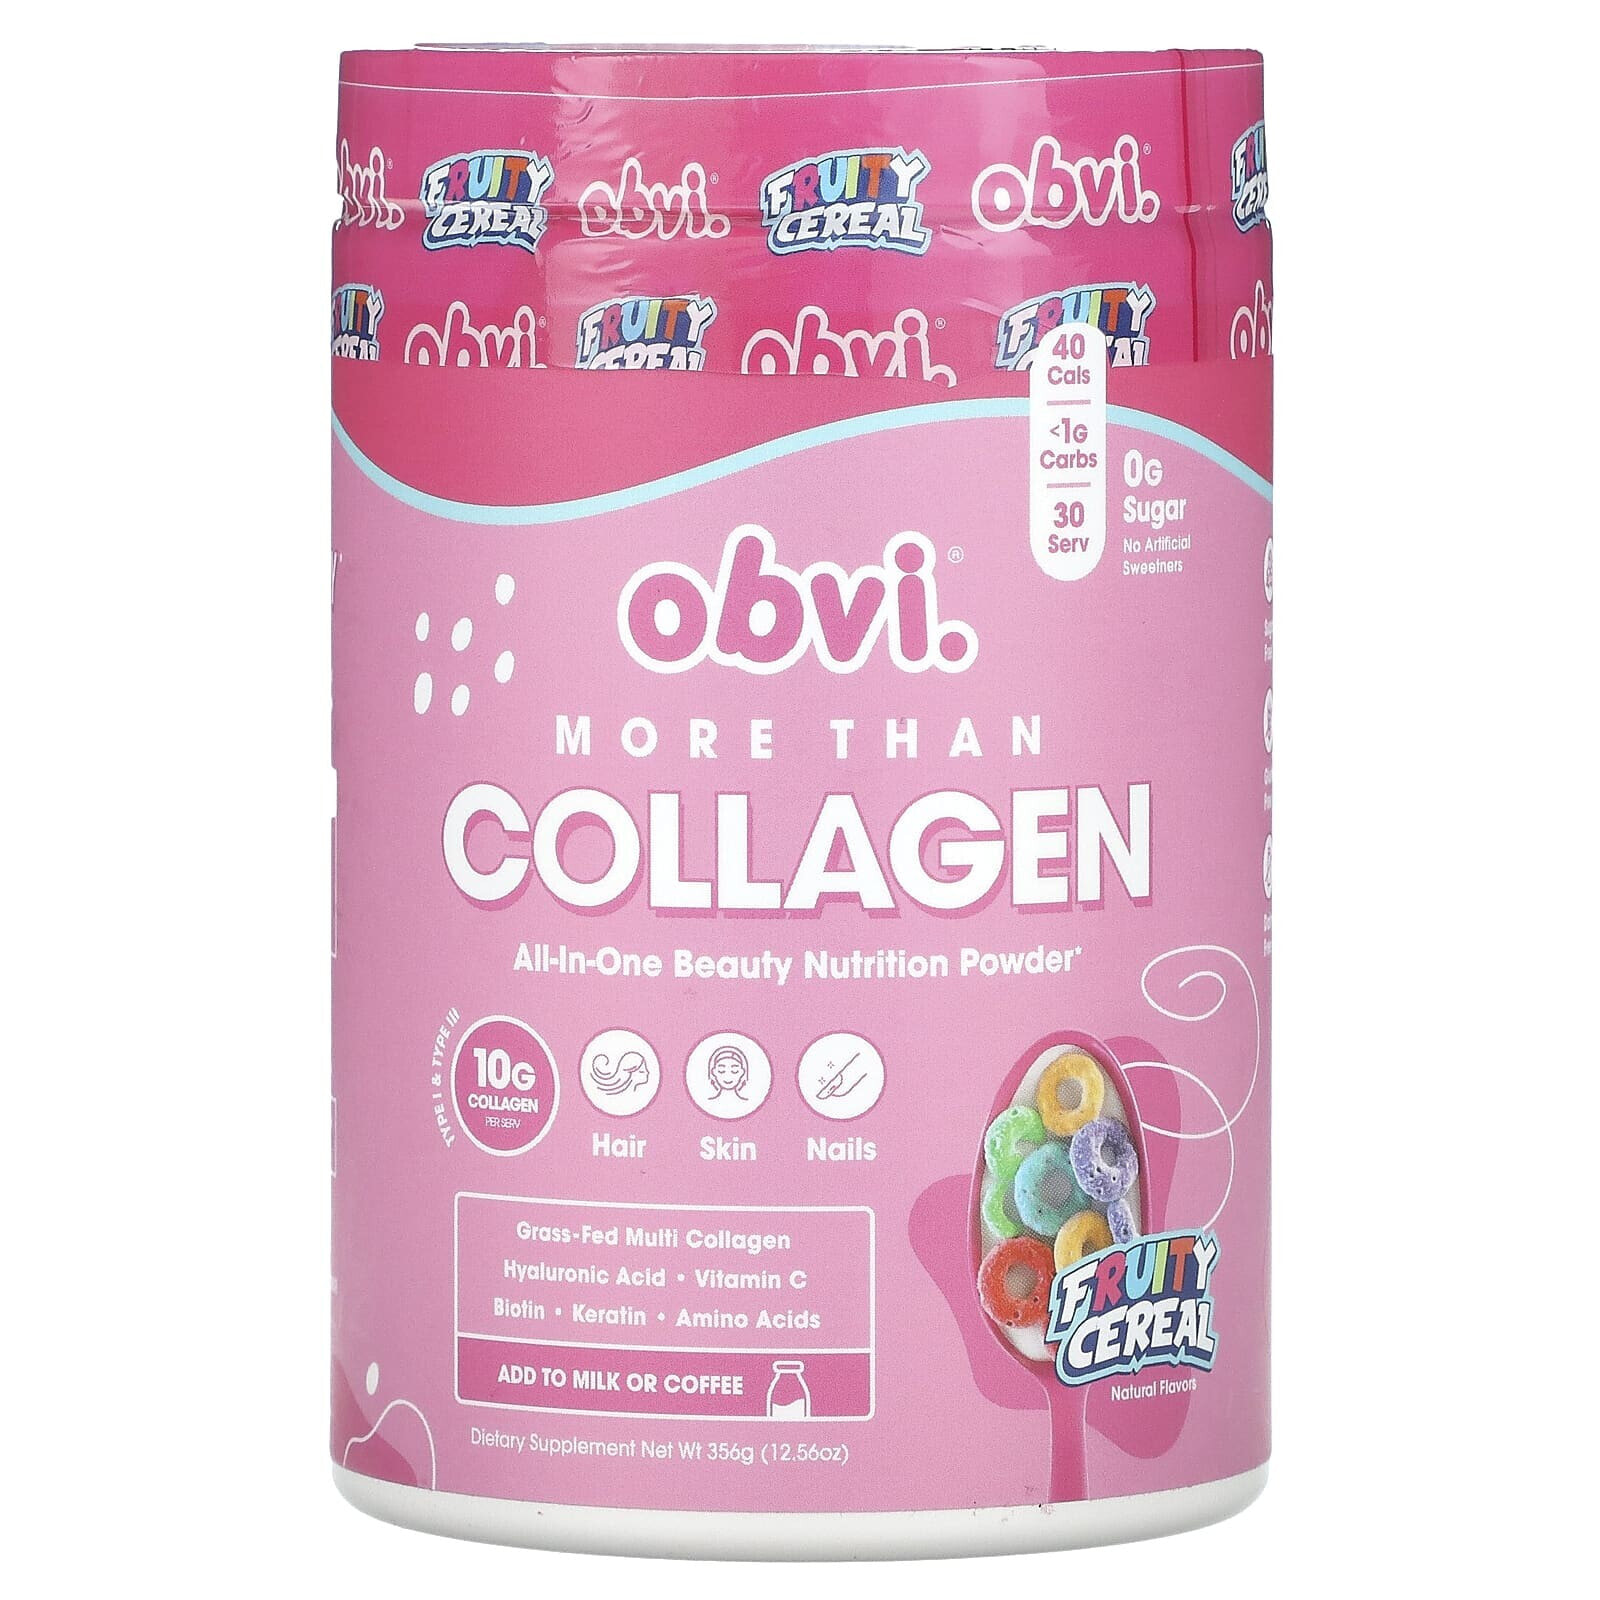 More Than Collagen, All-In-One Beauty Nutrition Powder, Fruity Cereal, 12.56 oz (356 g)